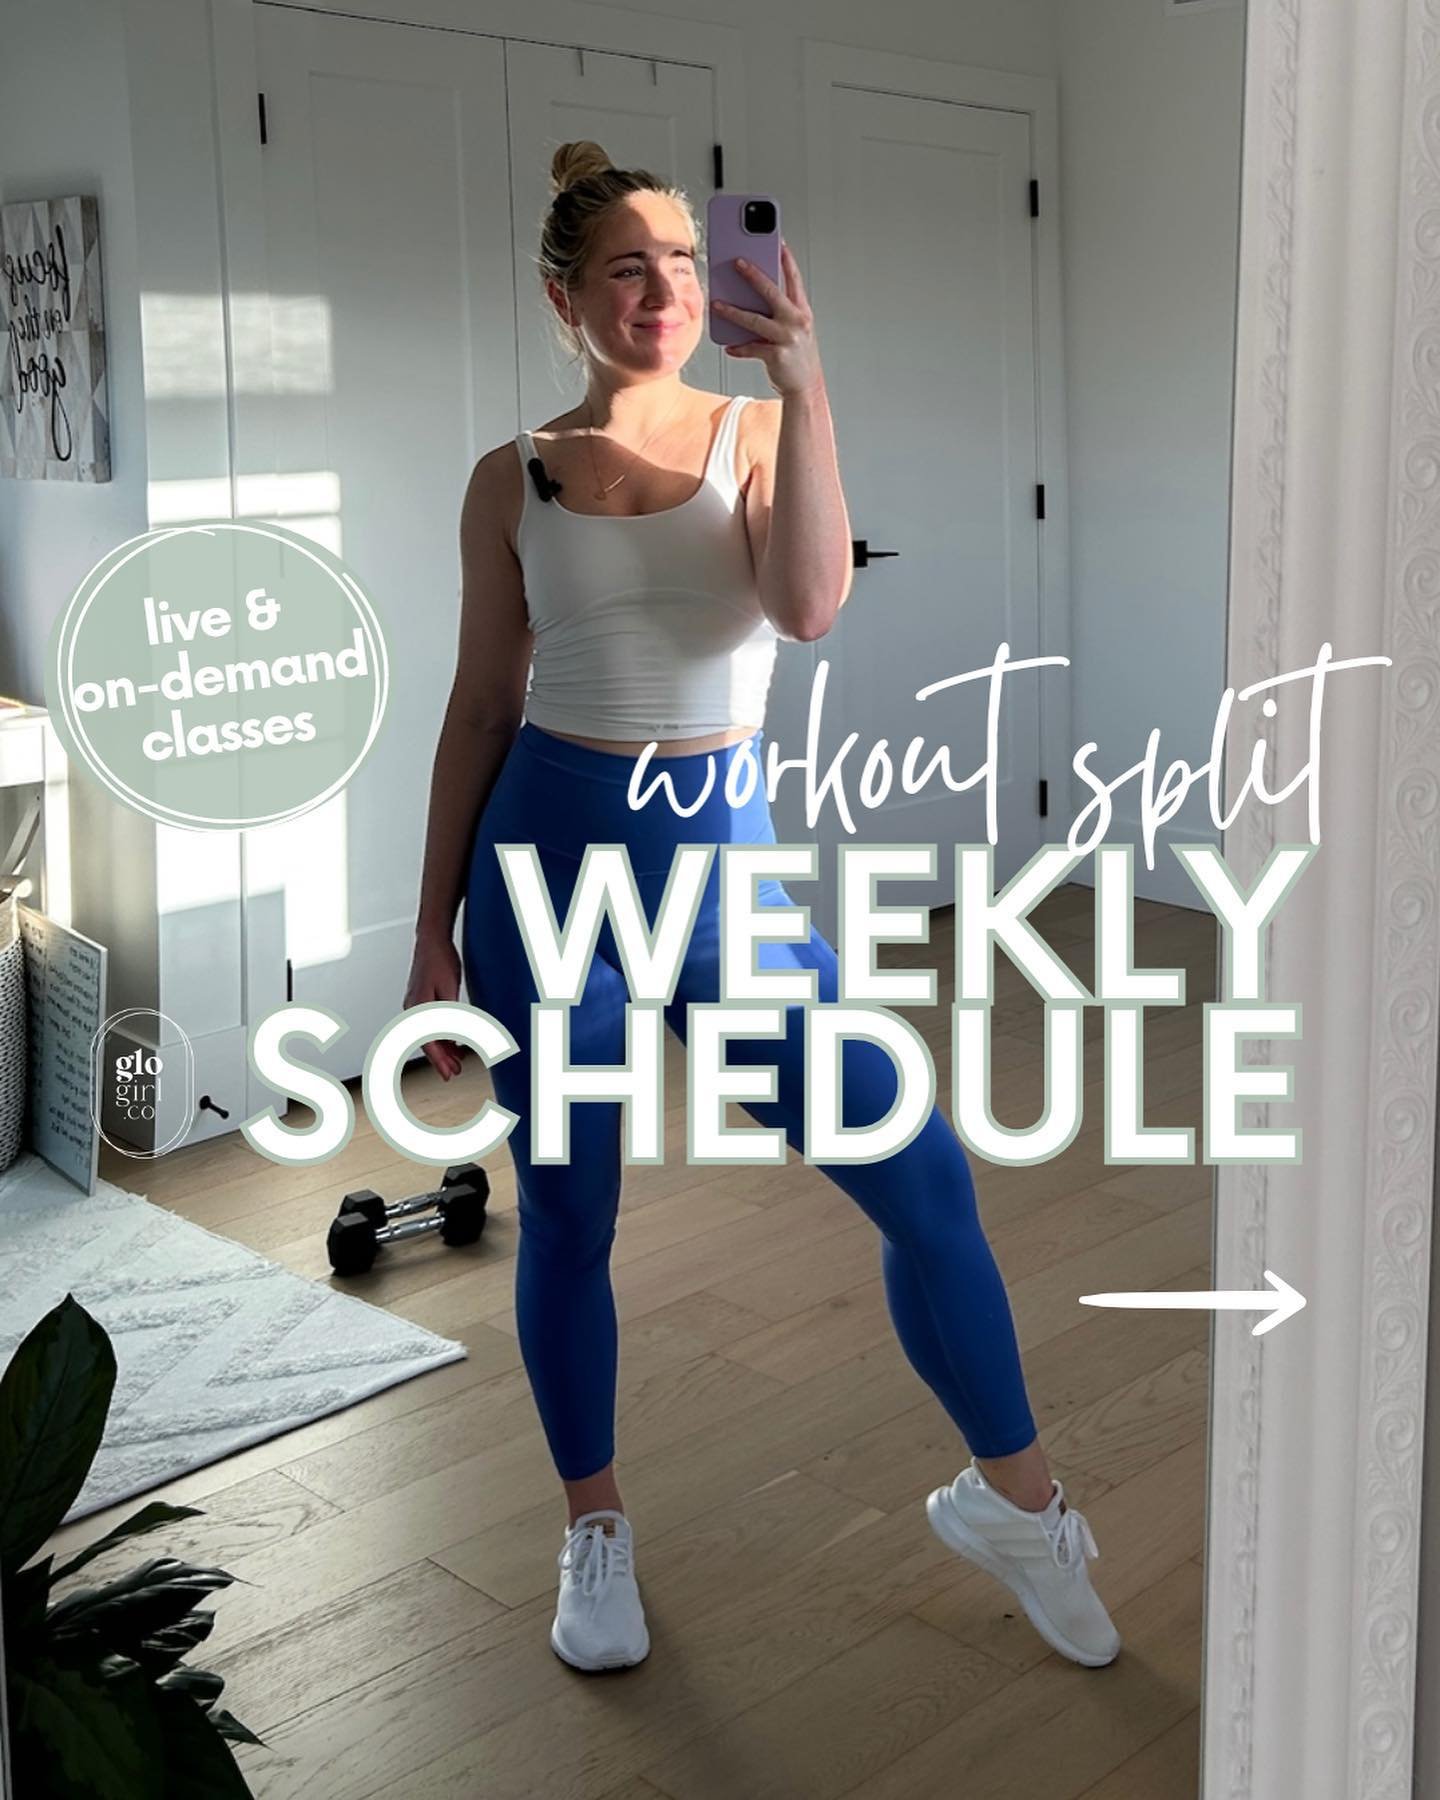 Join us this week!

Feel-good workouts + the extra accountability &amp; energy of LIVE classes, that you can do ANYWHERE.

See link in our bio &amp; see you on your mat! 🦋💗💪💫